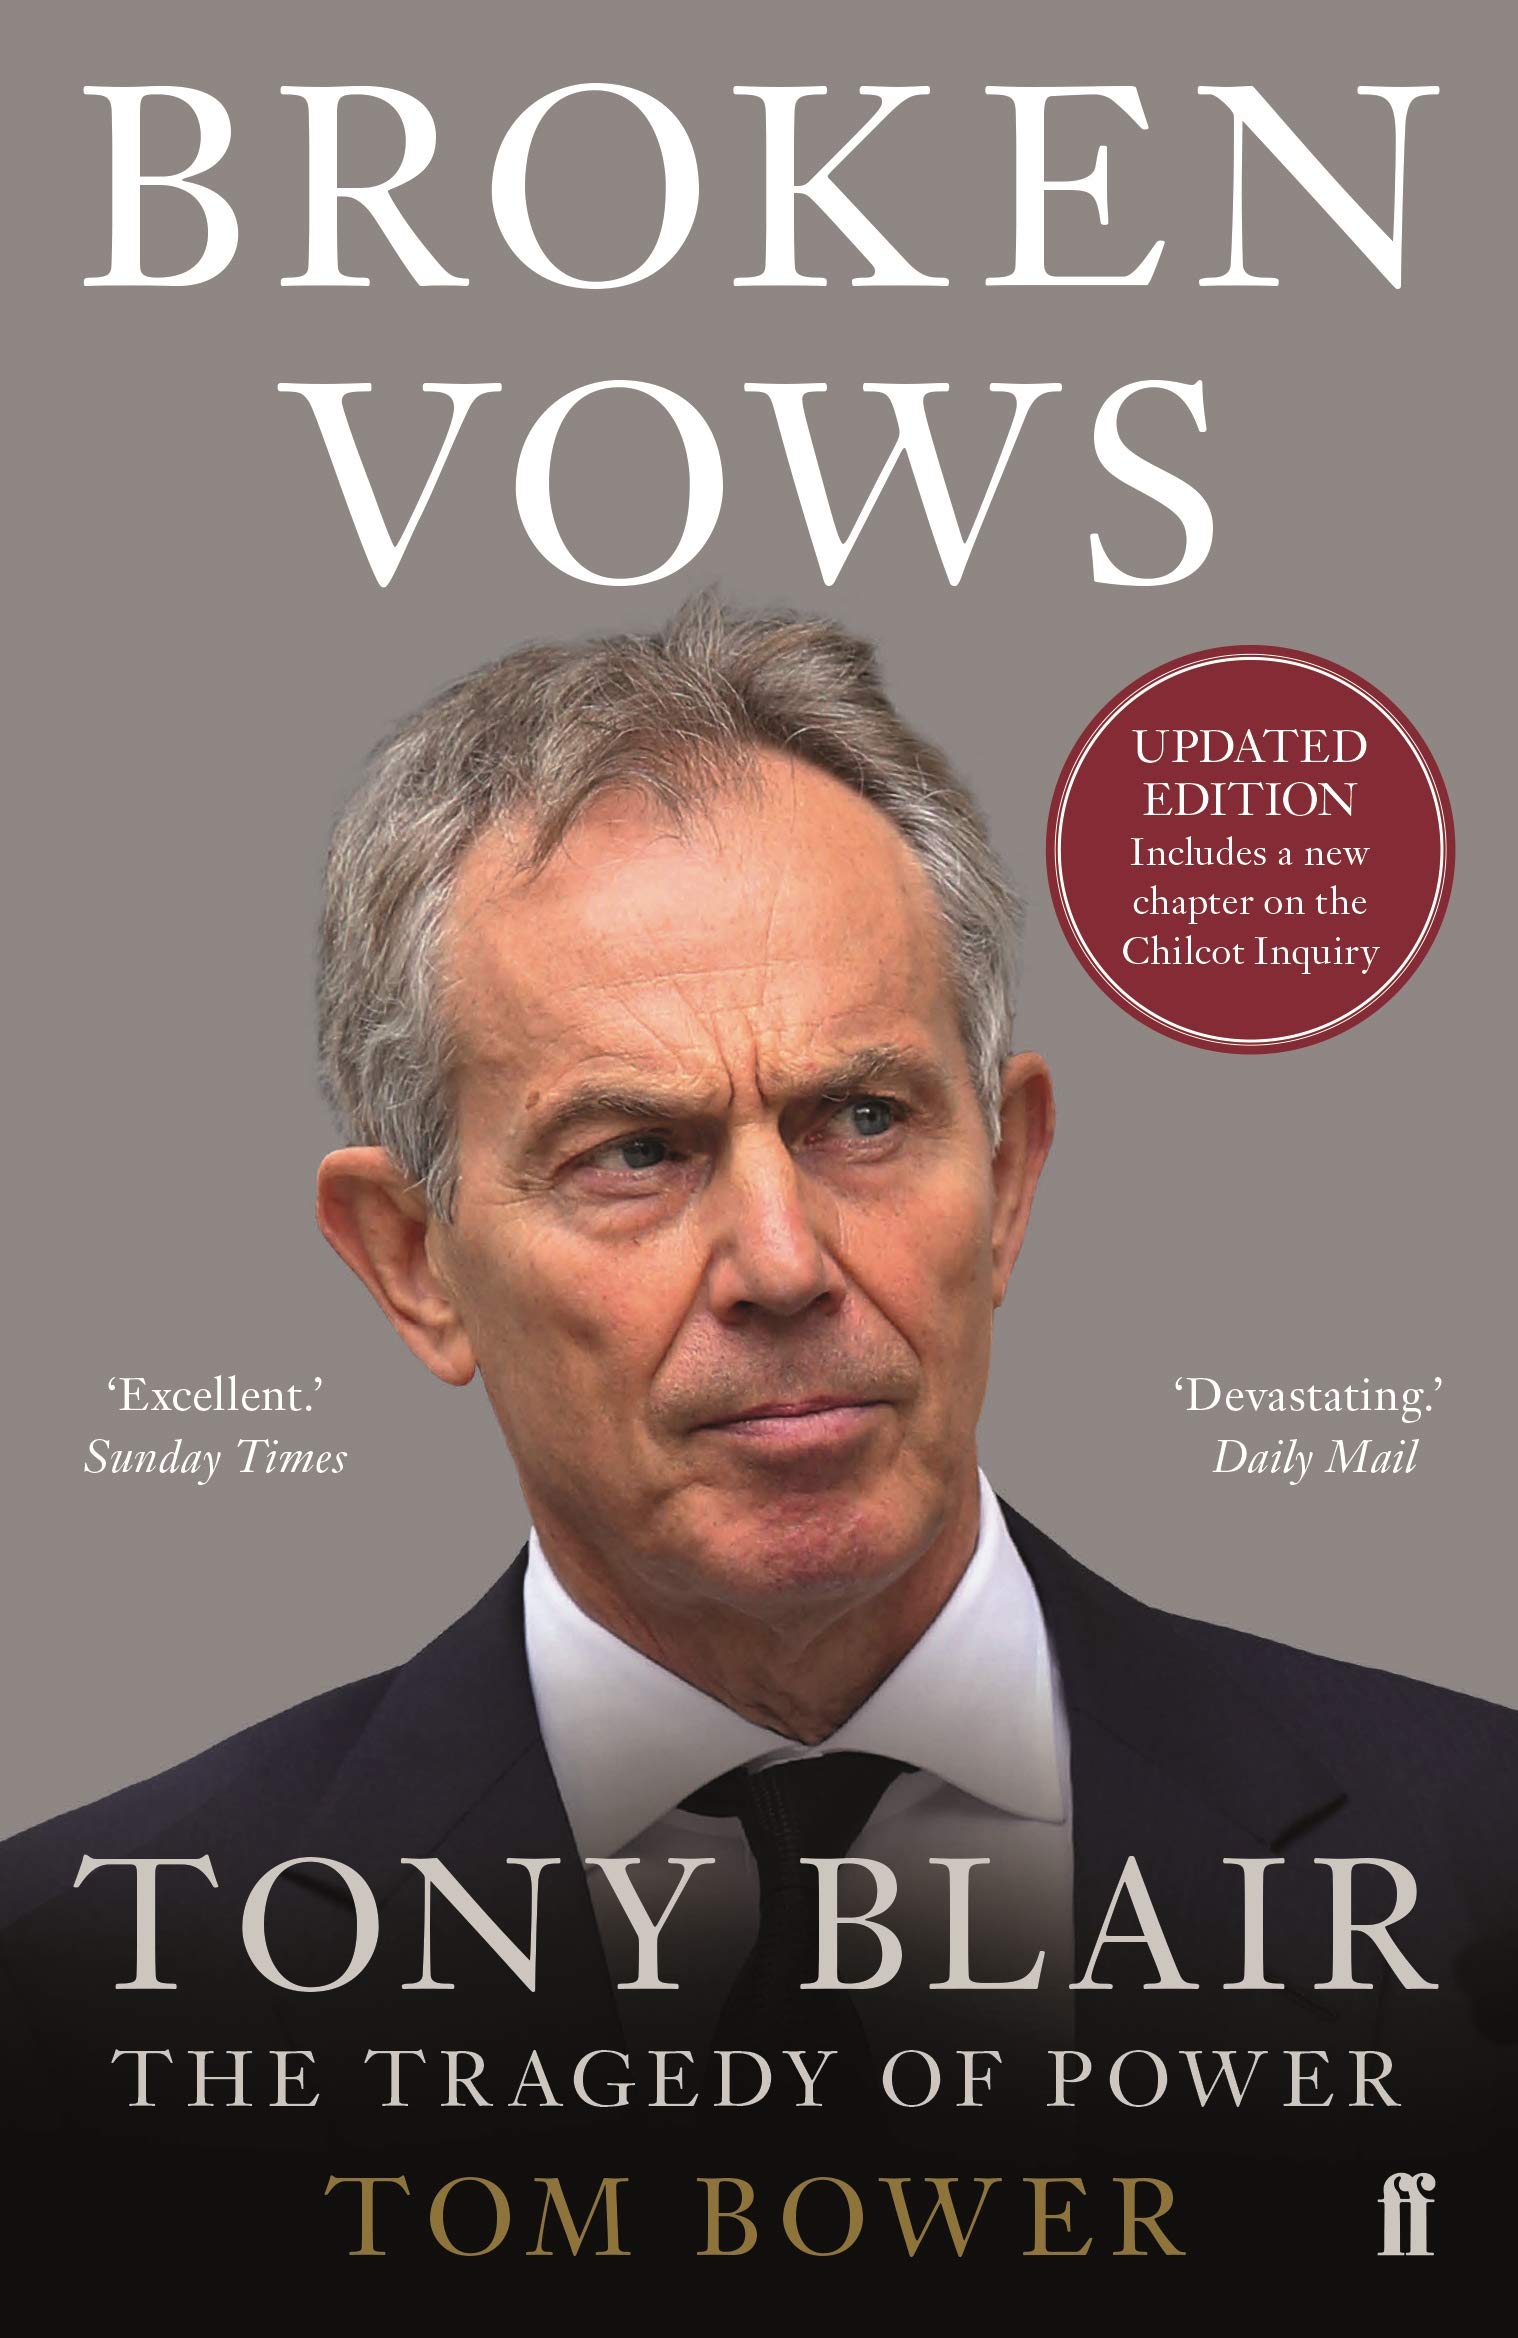 Broken Vows: Tony Blair: The Tragedy of Power